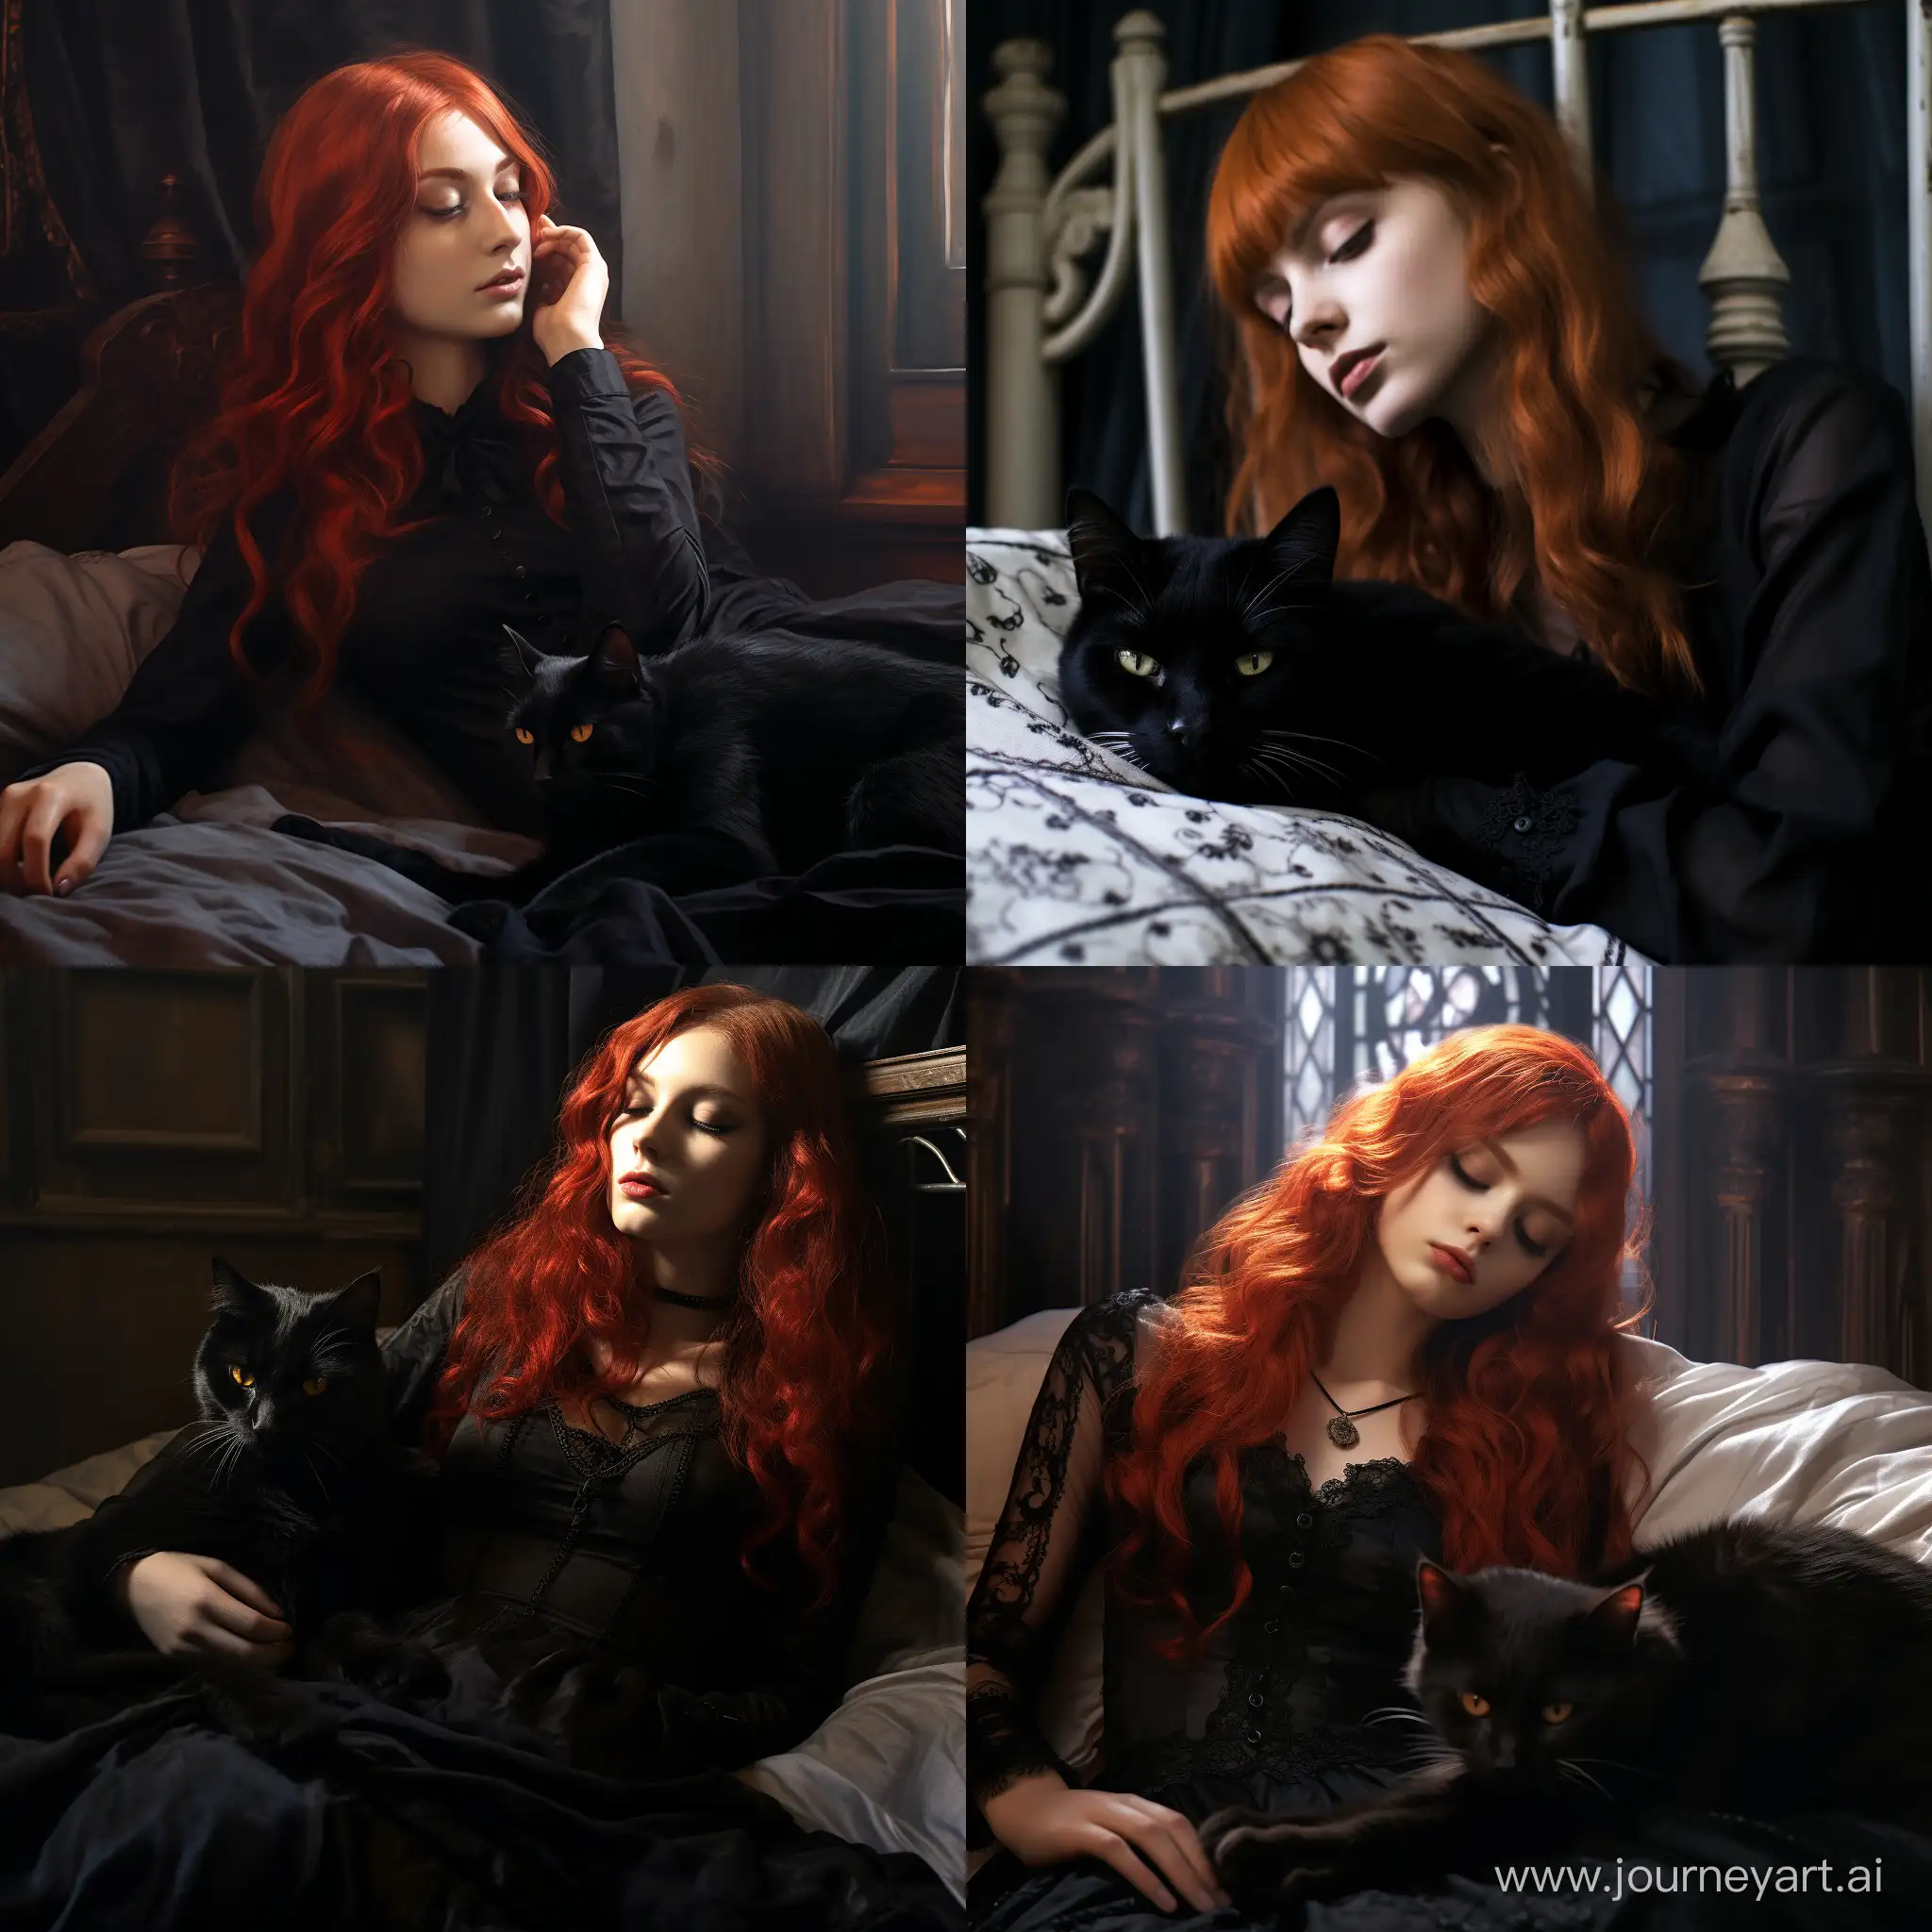 A girl with red hair in a black Gothic dress sleeps on a bed next to a Gothic-style cat